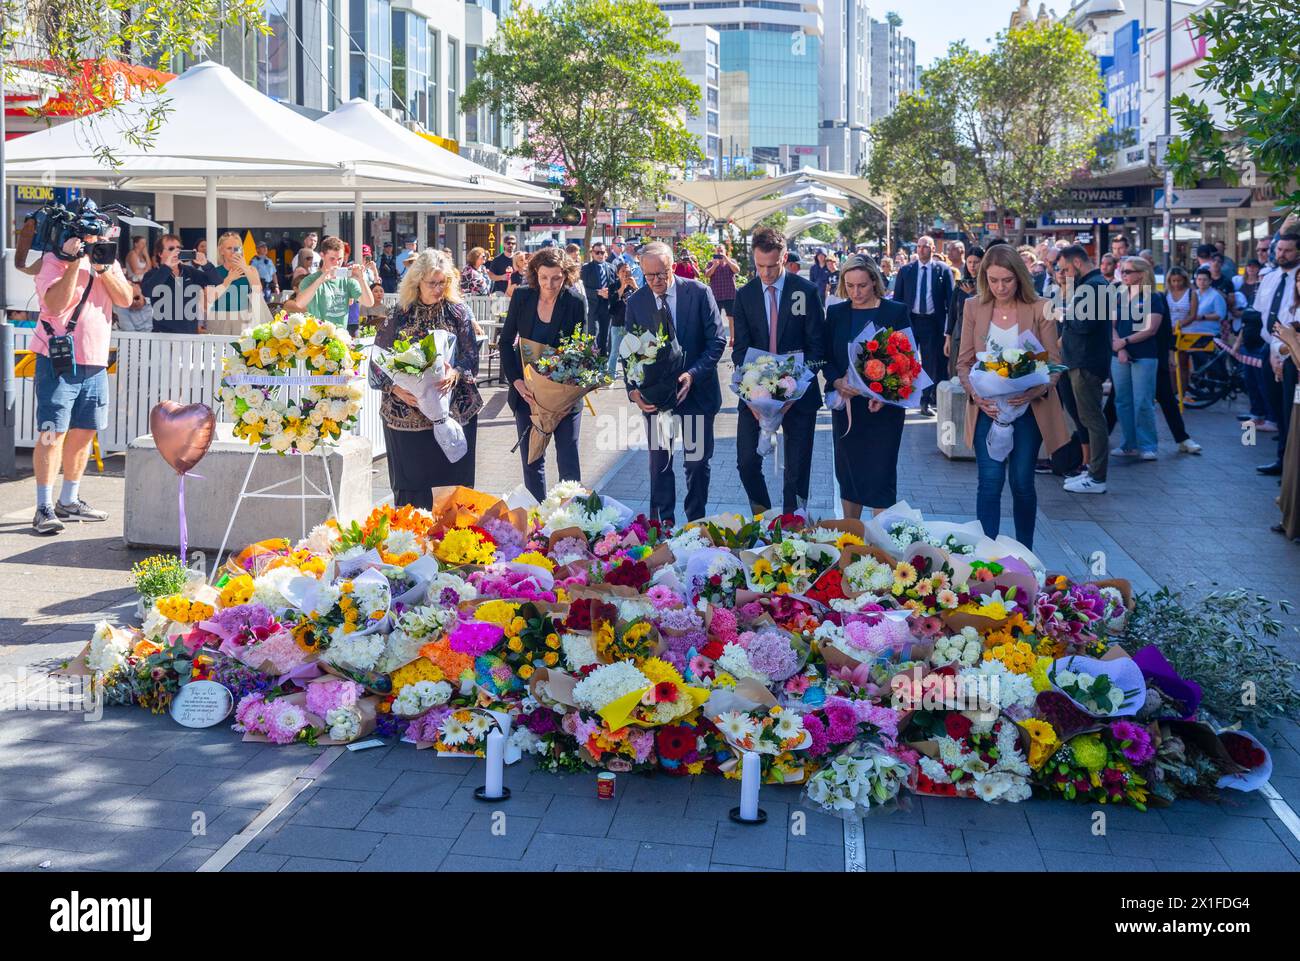 Sydney, Australia. 14 April 2024. Australian Prime Minister Anthony Albanese attends a wreath laying in Bondi Junction Mall for the victims of Joel Cauchi's knife attack in the Westfield Bondi Junction shopping centre that occurred on Saturday, 13 April 2024. Cauchi, 40, who suffered from mental health issues, died at the scene after being shot by police. Pictured (left to right): Paula Masselos (Mayor of Waverley), Allegra Spender (MP for the Electorate of Wentworth), Anthony Albanese (Prime Minister), Chris Minns (Premier of NSW), Coogee MP Marjorie O'Neill and MP for Vaucluse Kellie Sloane. Stock Photo